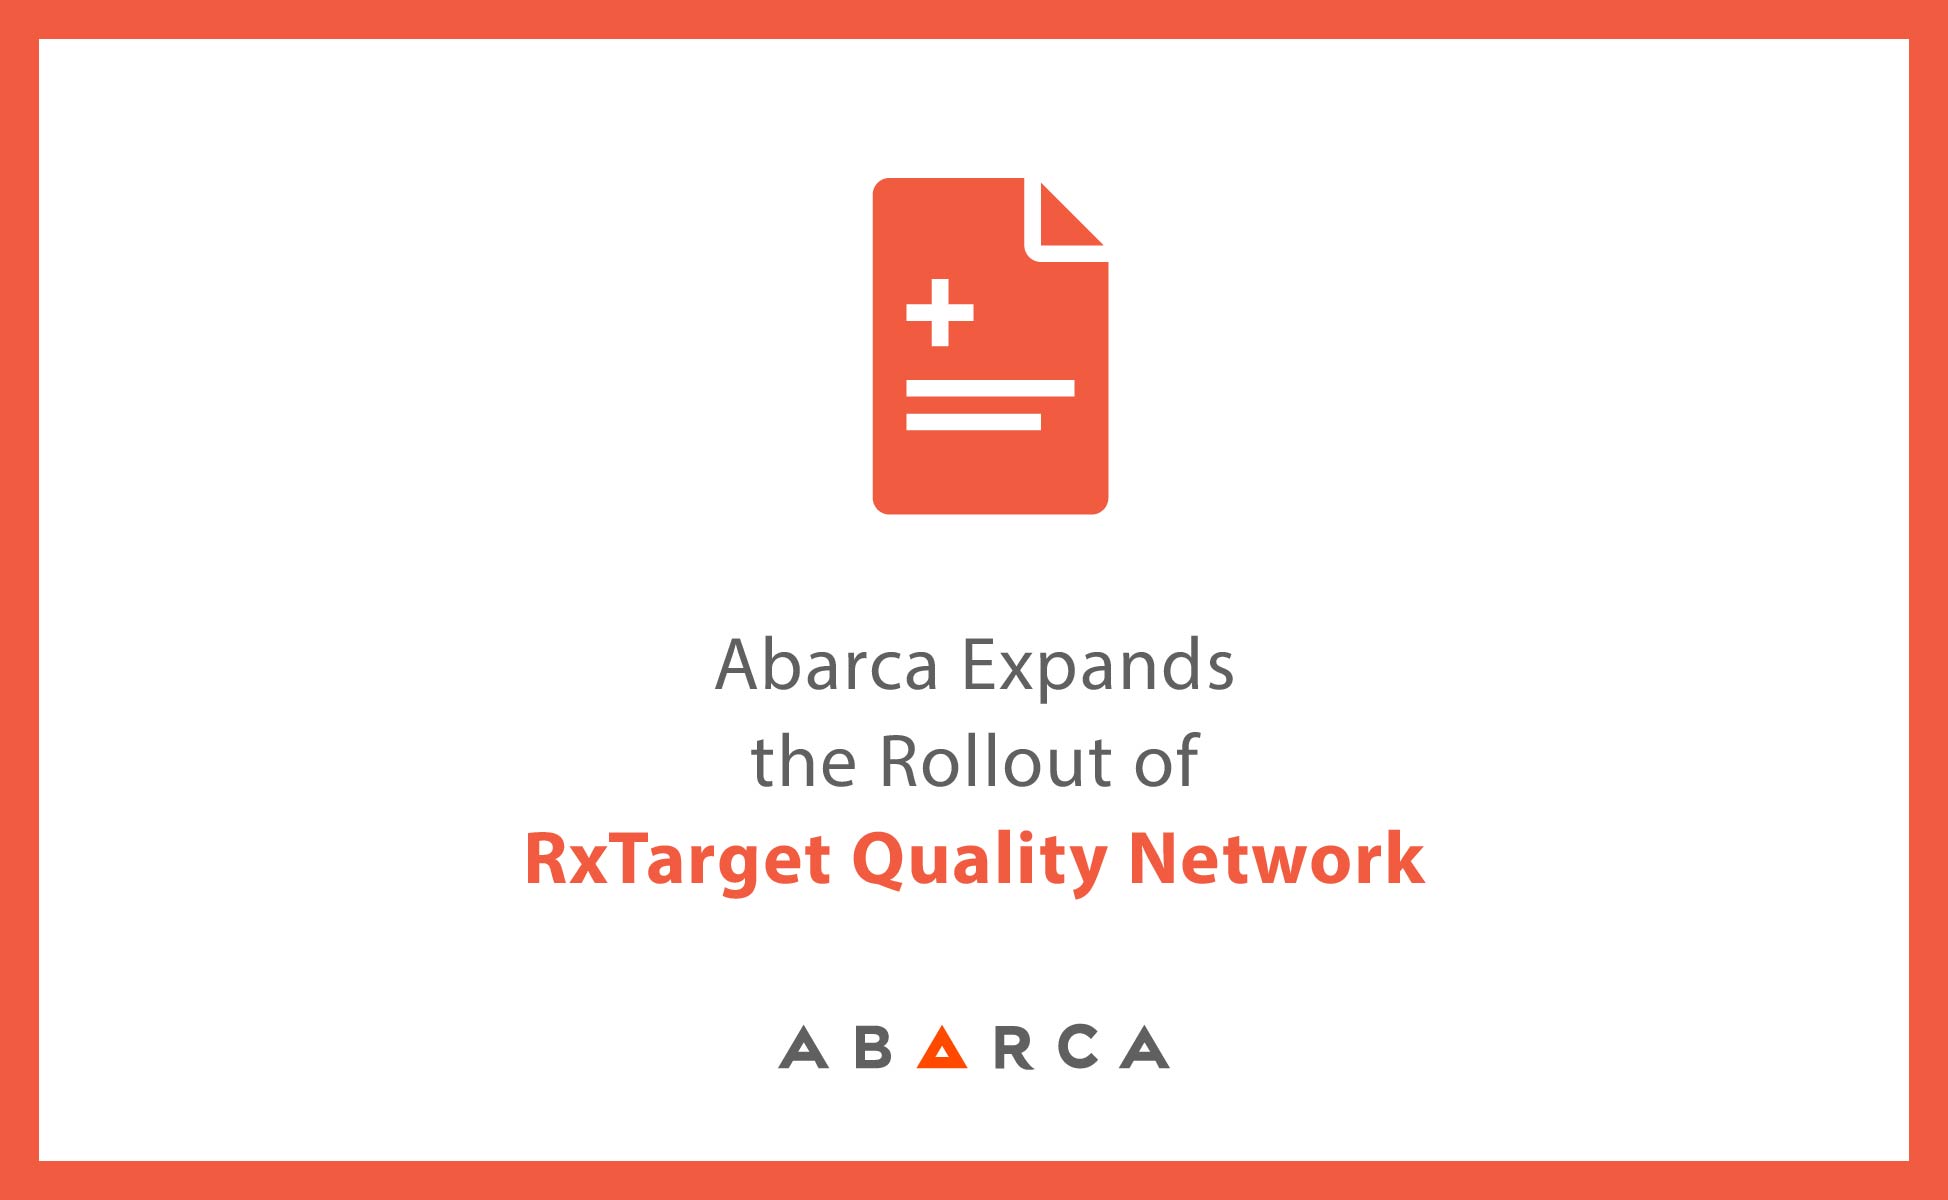 Abarca expands the rollout of RxTarget quality network